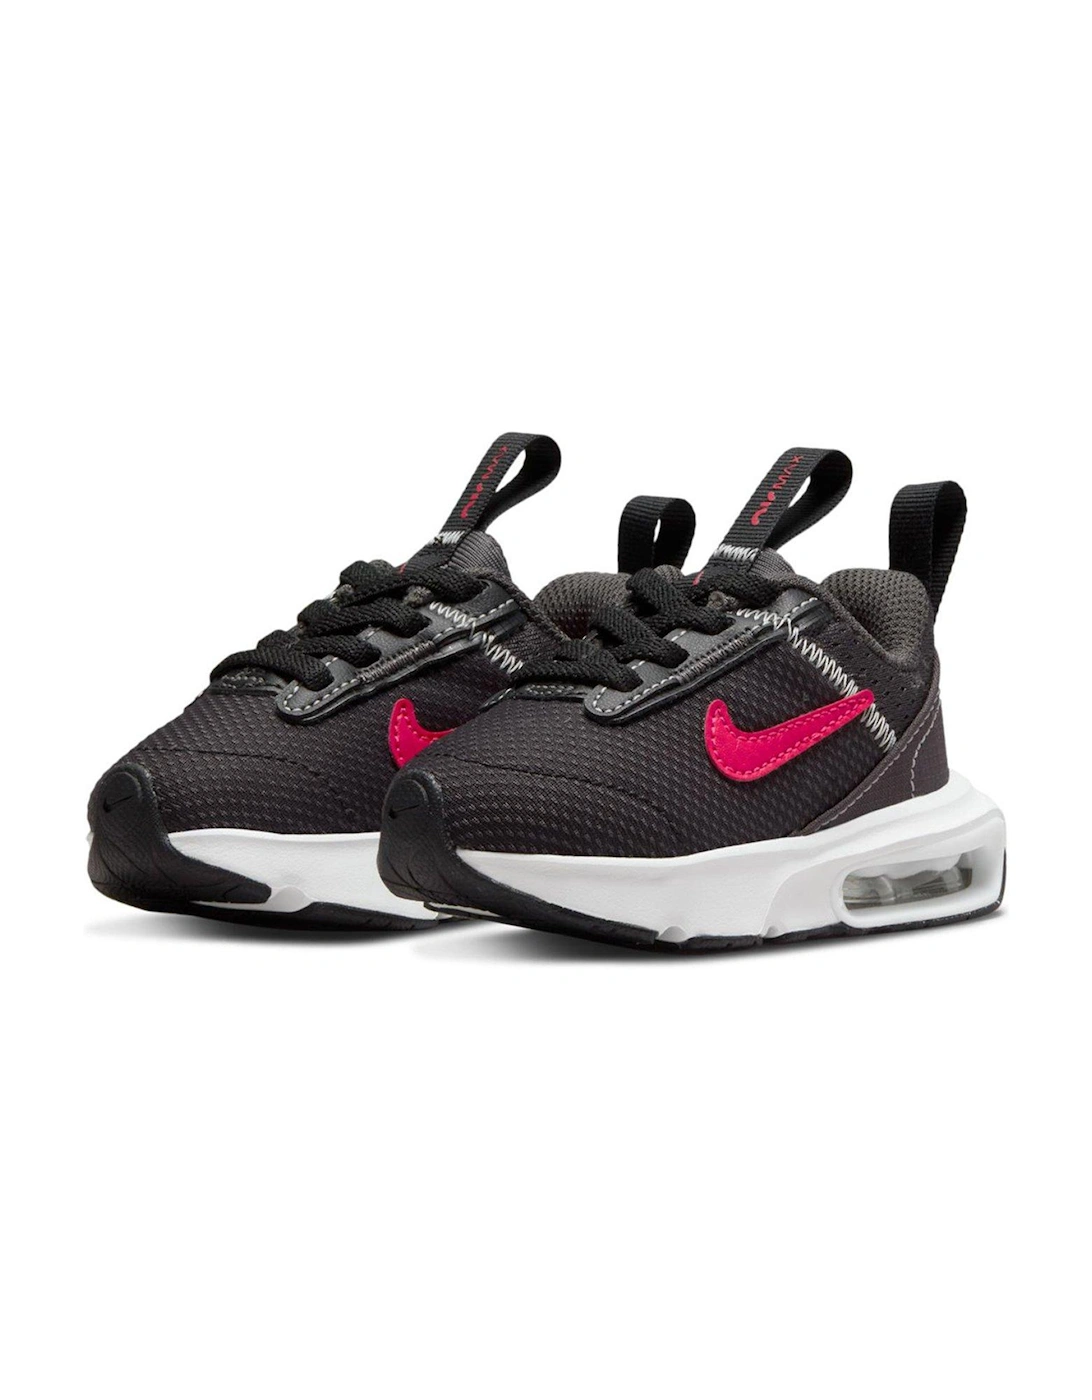 Air Max Intrlk Infants Unisex Trainers - Black/Red